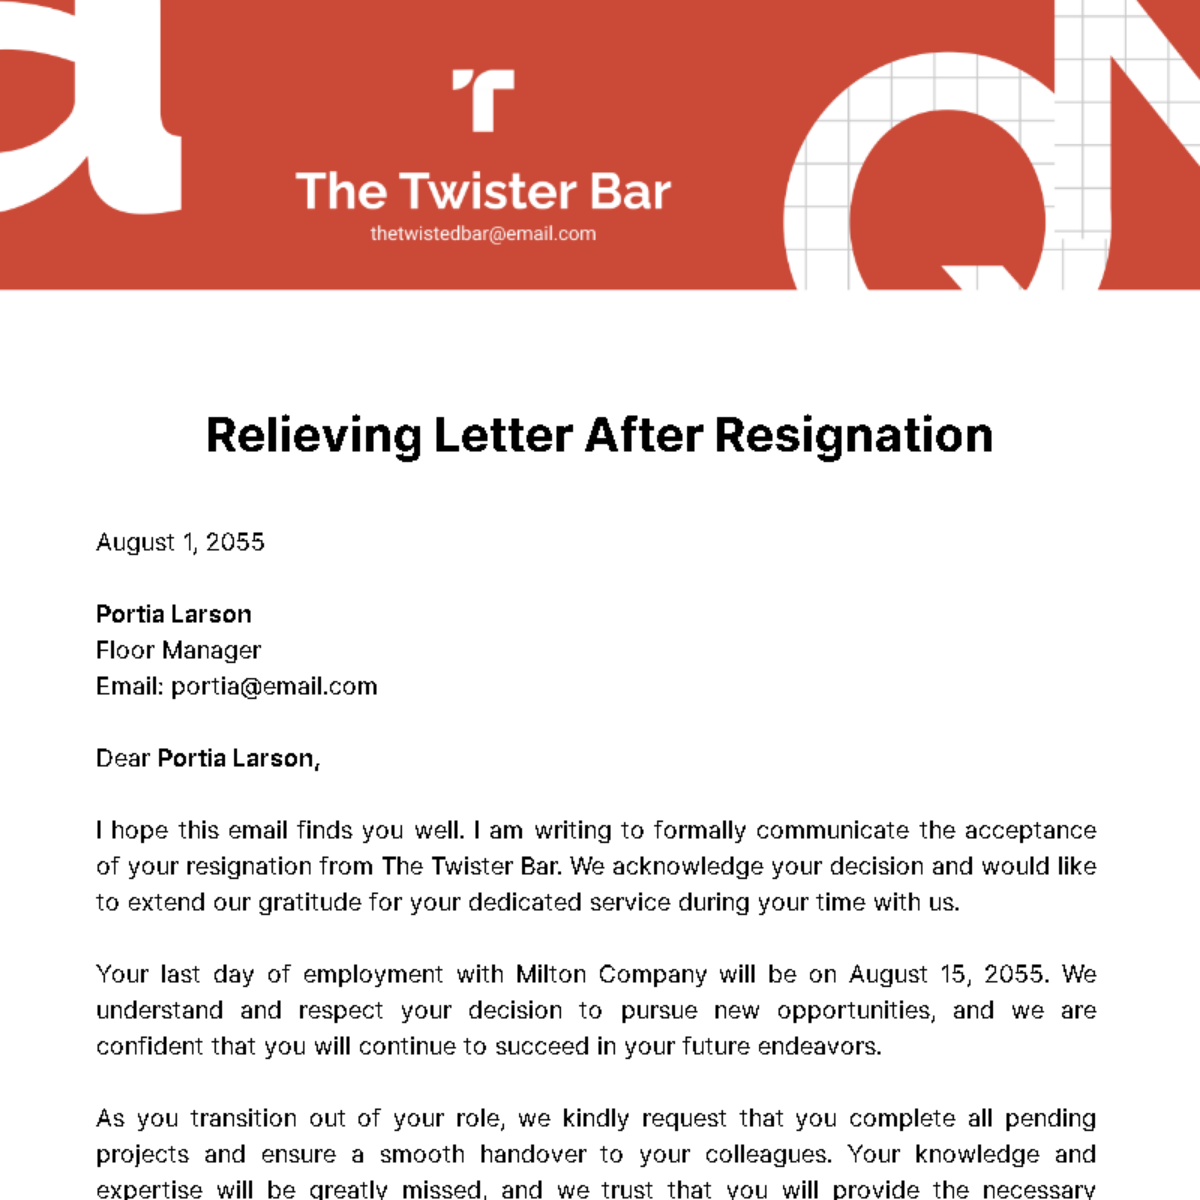 Relieving Letter After Resignation Template